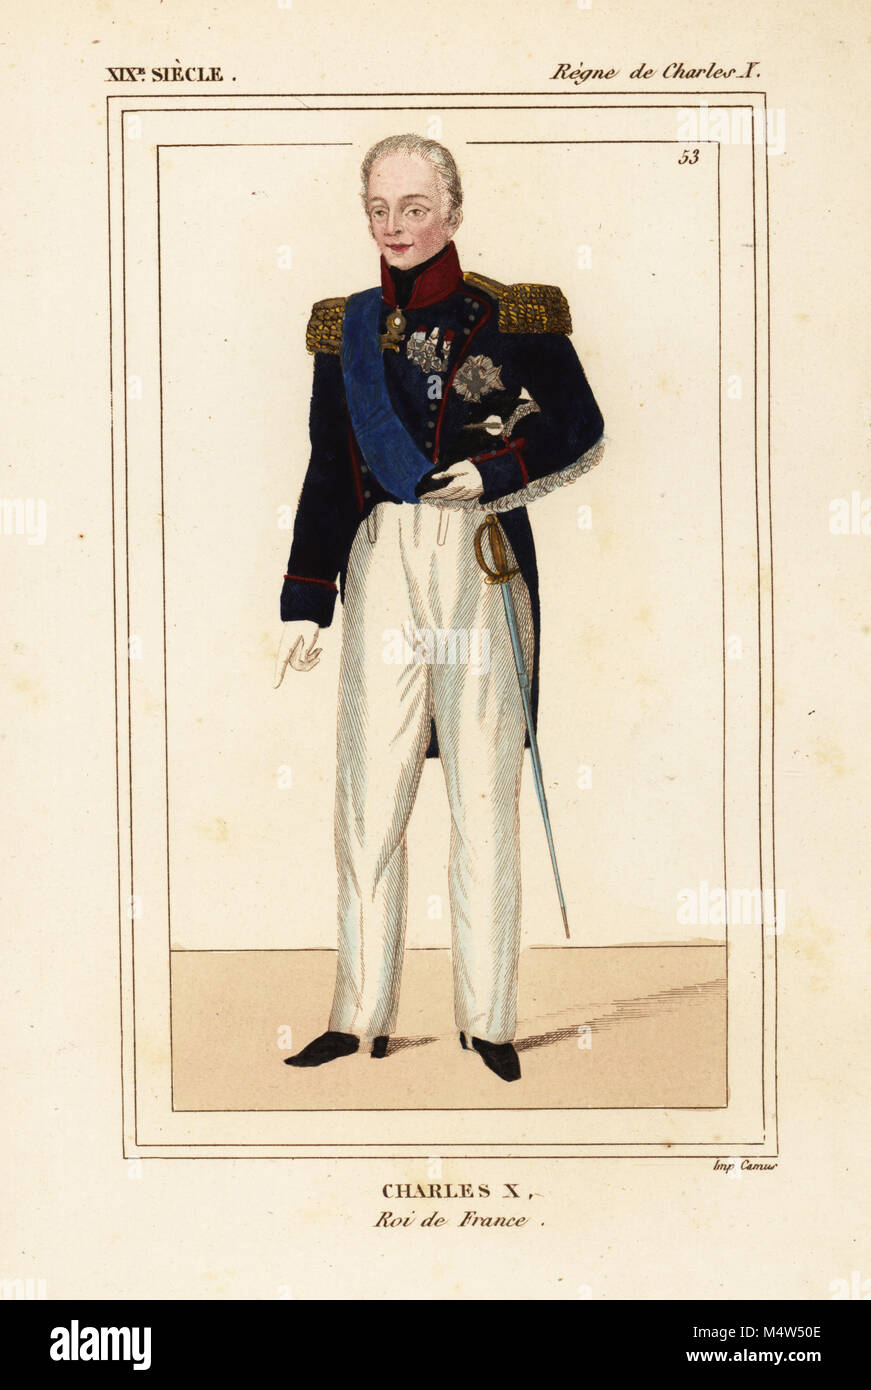 King Charles X of France 1757-1836 in military uniform of a colonel in the Garde Nationale with grand-cordon bleu sash and chain of the Order of the Golden Fleece, Ordre de la Toison-d'Or. Handcoloured lithograph by Leopold Massard from Le Bibliophile Jacob aka Paul Lacroix's Costumes Historiques de la France (Historical Costumes of France), Administration de Librairie, Paris, 1852. Stock Photo